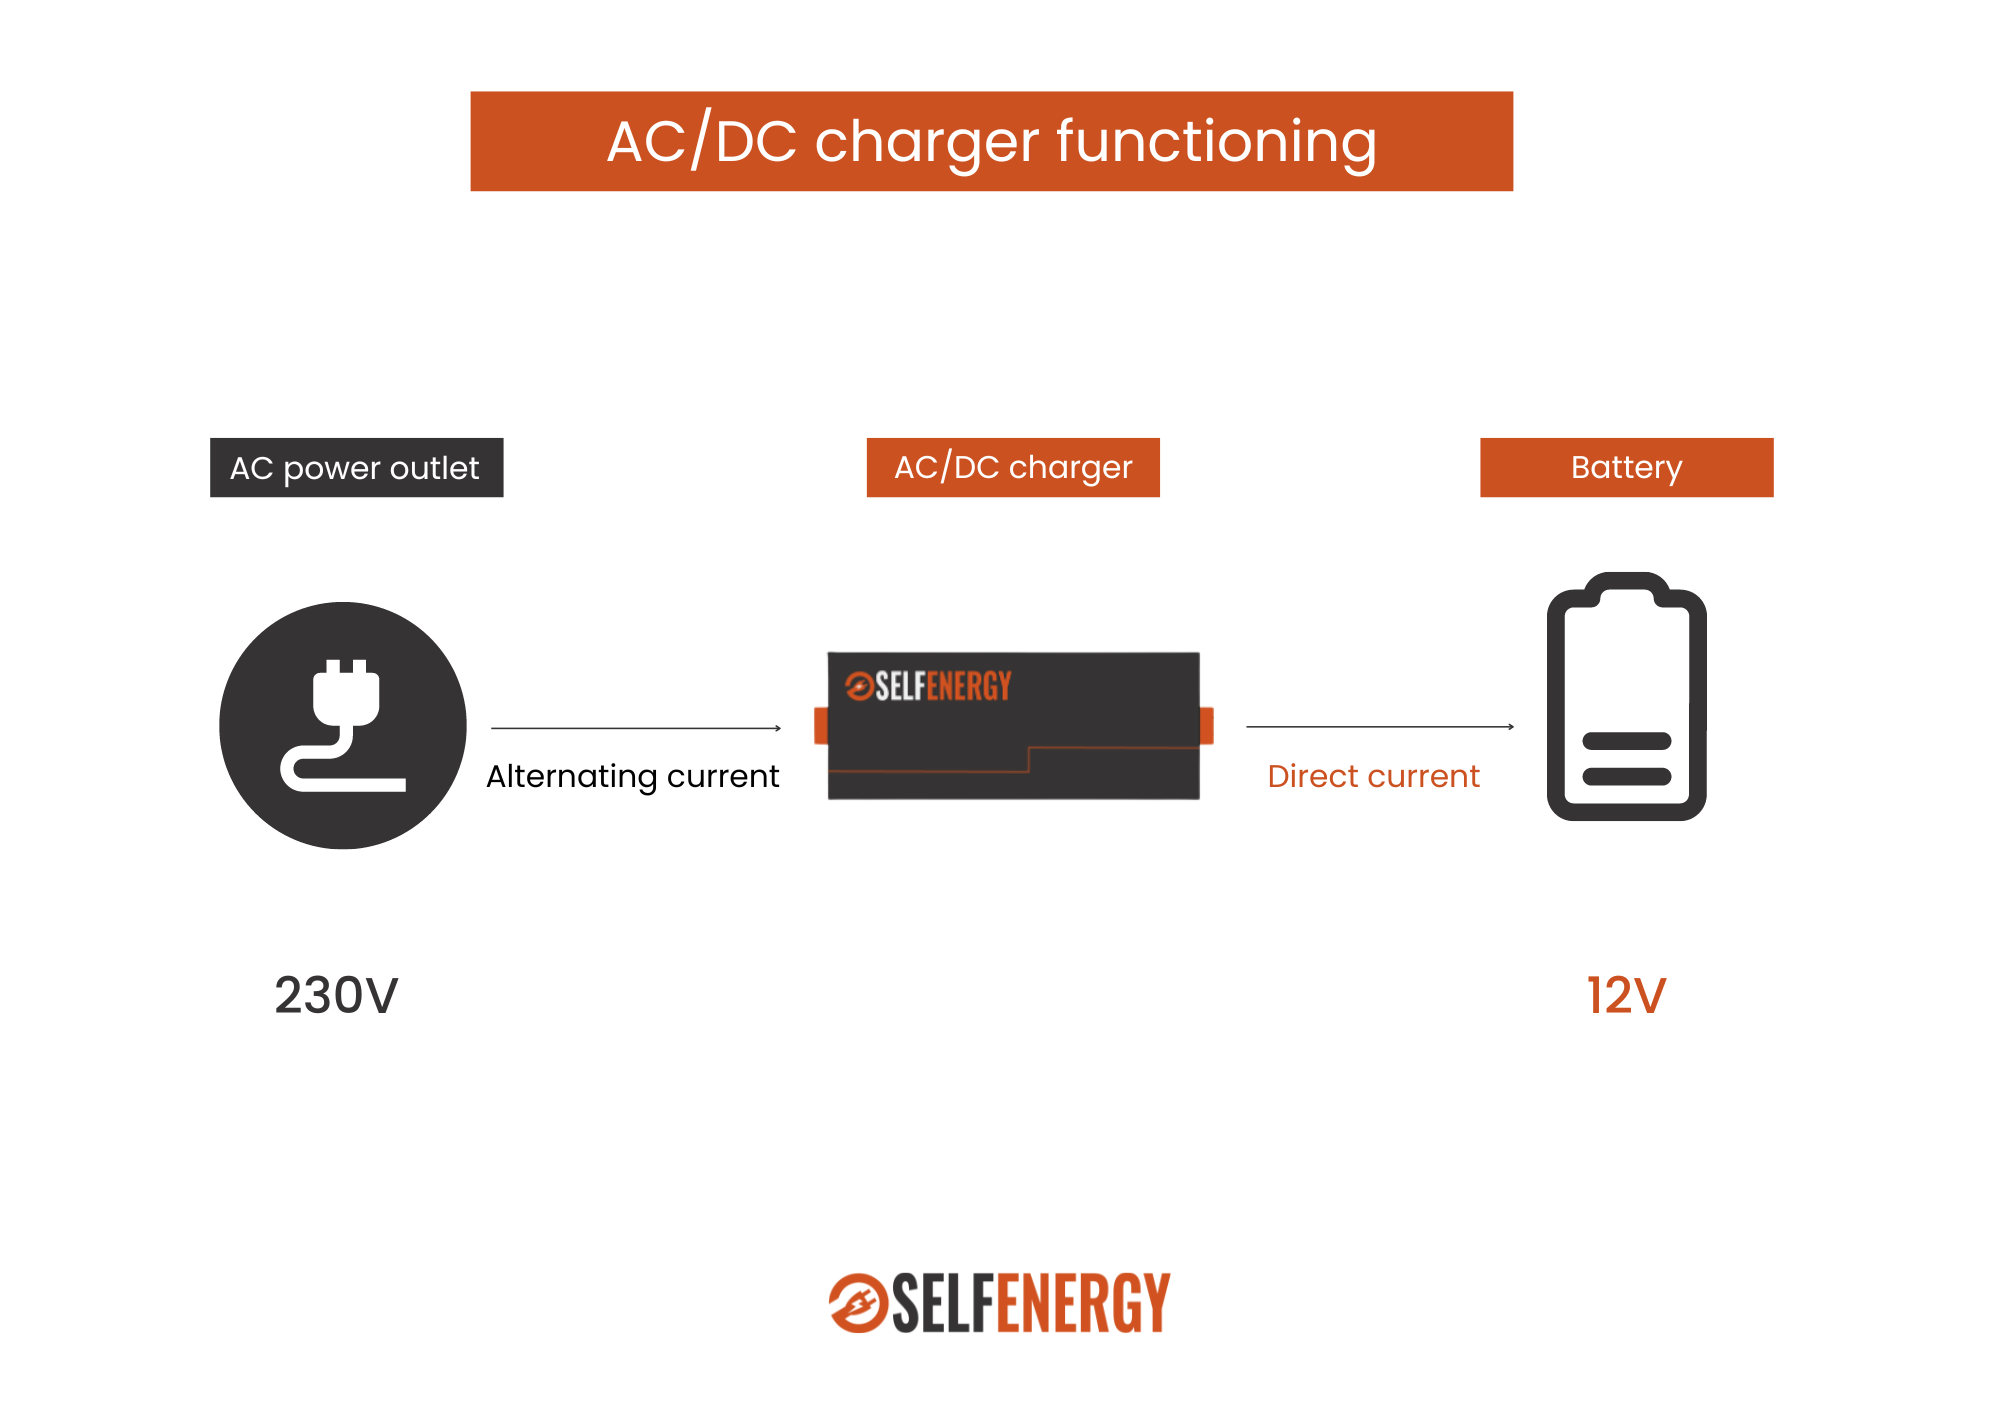 AC/DC charger functioning - Selfenergy